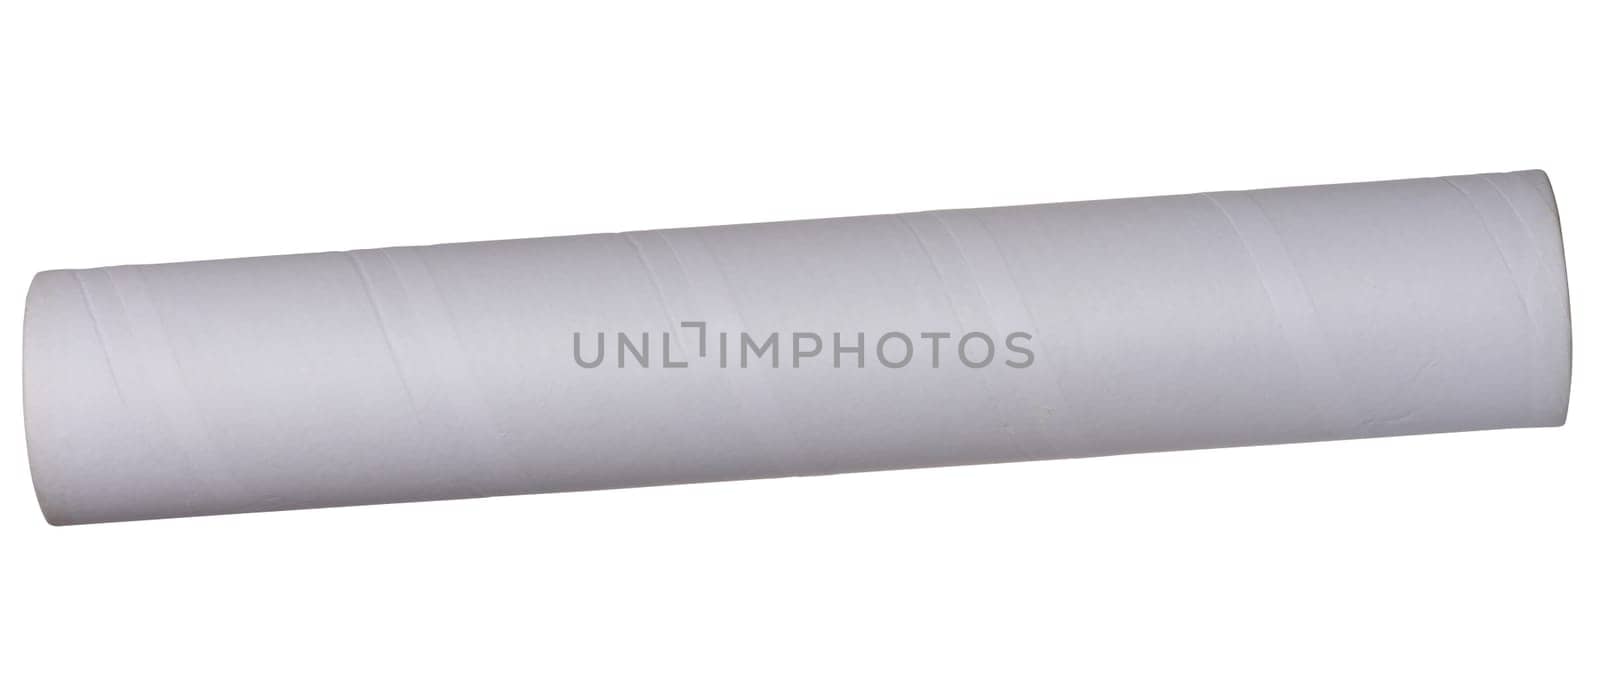 White paper towel tube on white isolated background by ndanko